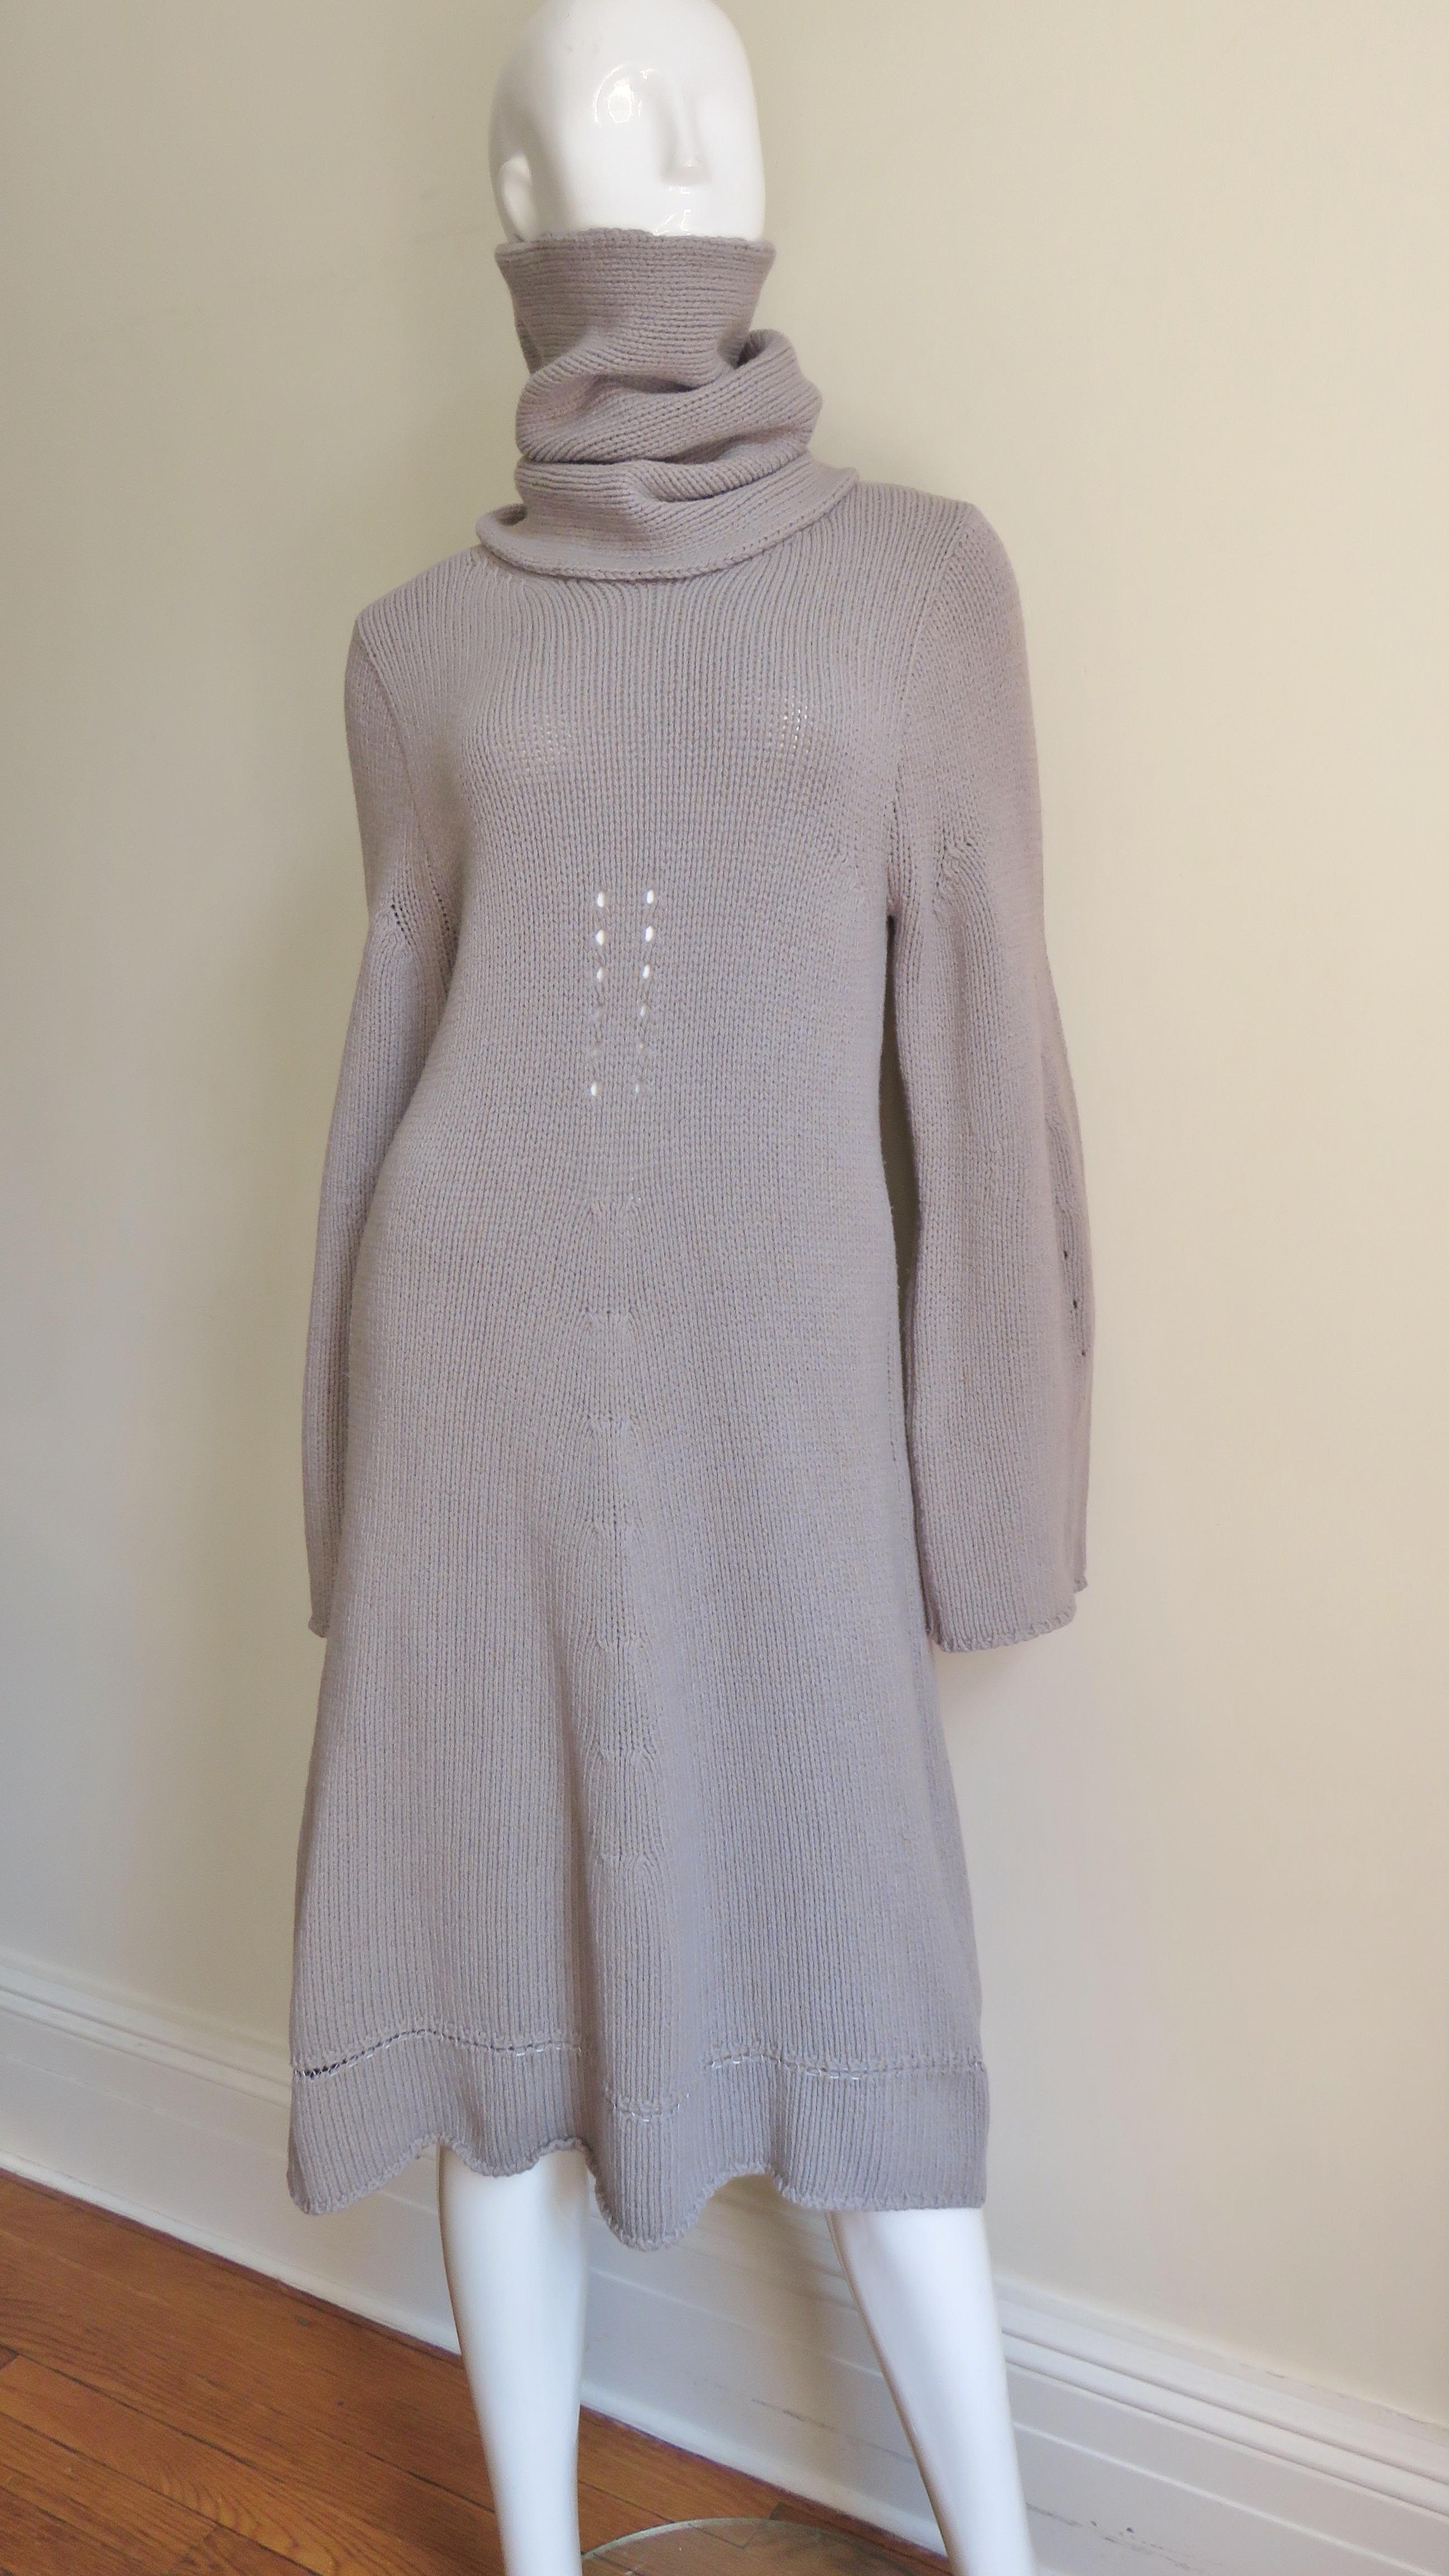 A fabulous taupe wool knit over sized sweater dress and separate turtleneck from Belgium designer Ann Demeulemeester.  The dress follows the line of the body then flares to the hem. It has long sleeves and comes with a separate neck tube.
Fits sizes